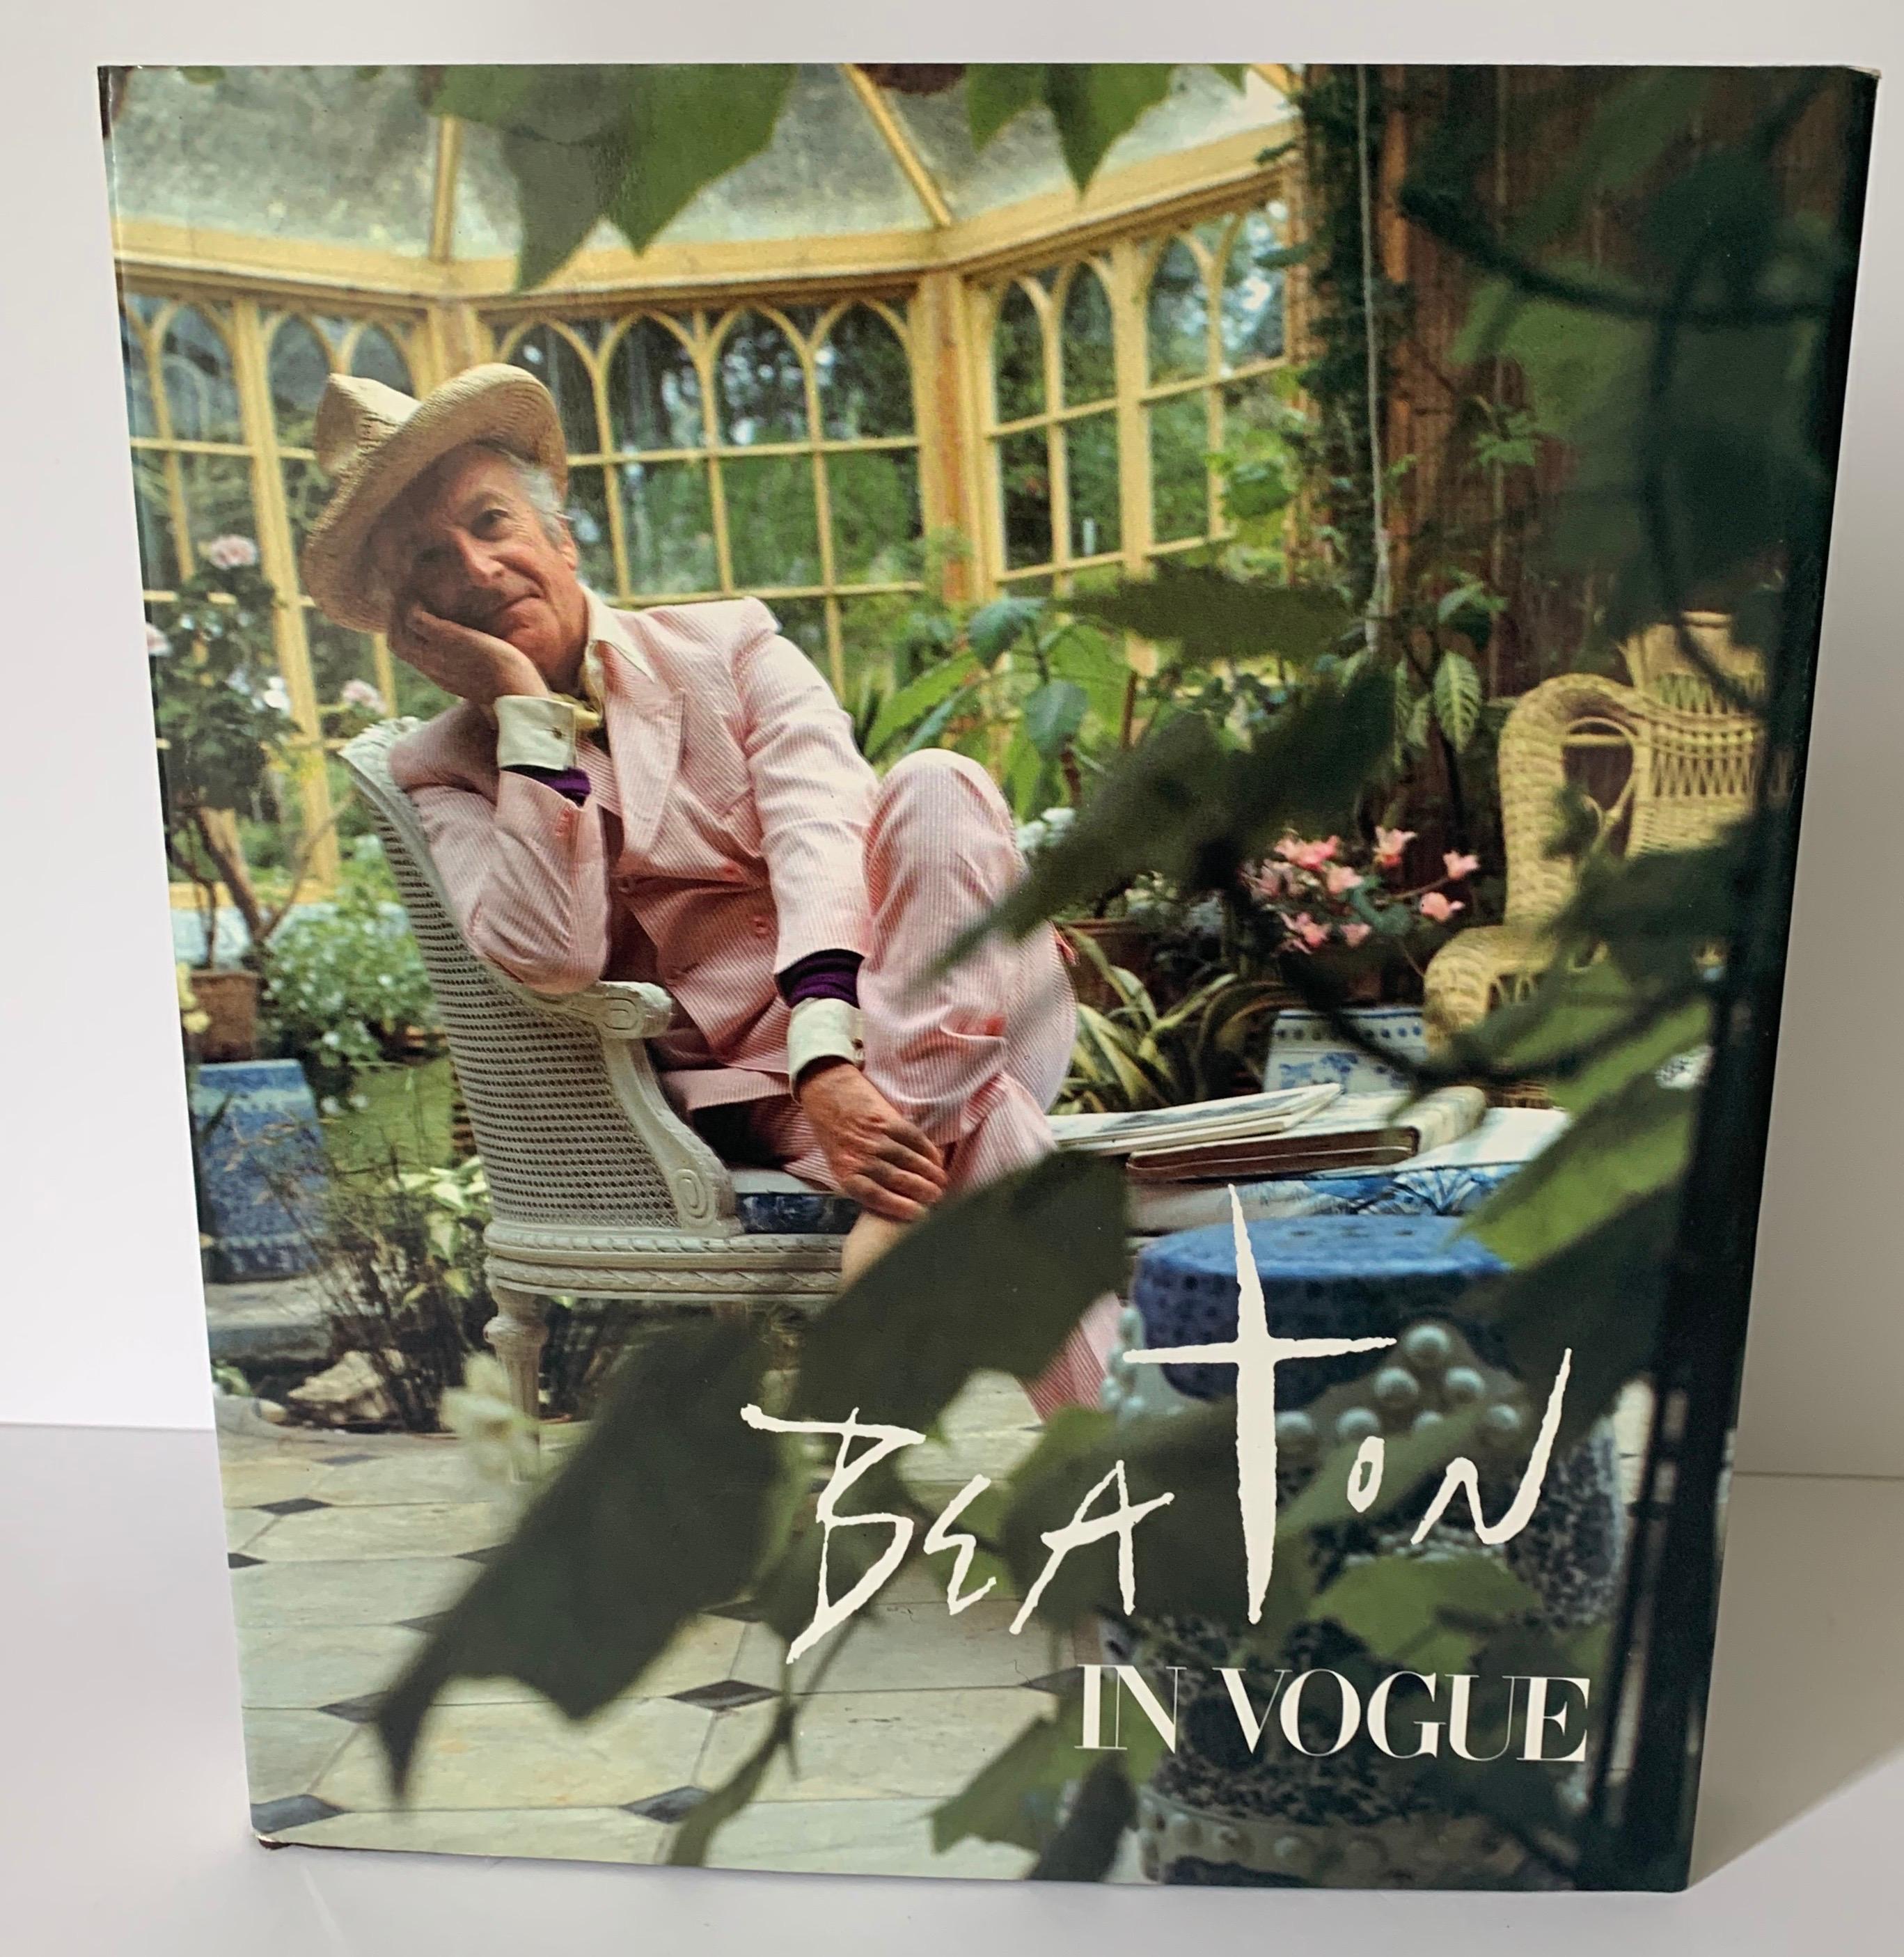 Beaton In Vogue 1st Edition hardcover book. Beaton in Vogue
By Josephine Ross. Published by Clarkson N. Potter, First American Edition, 1986. 240 pages featuring photographs spanning Beaton’s illustrious career. 